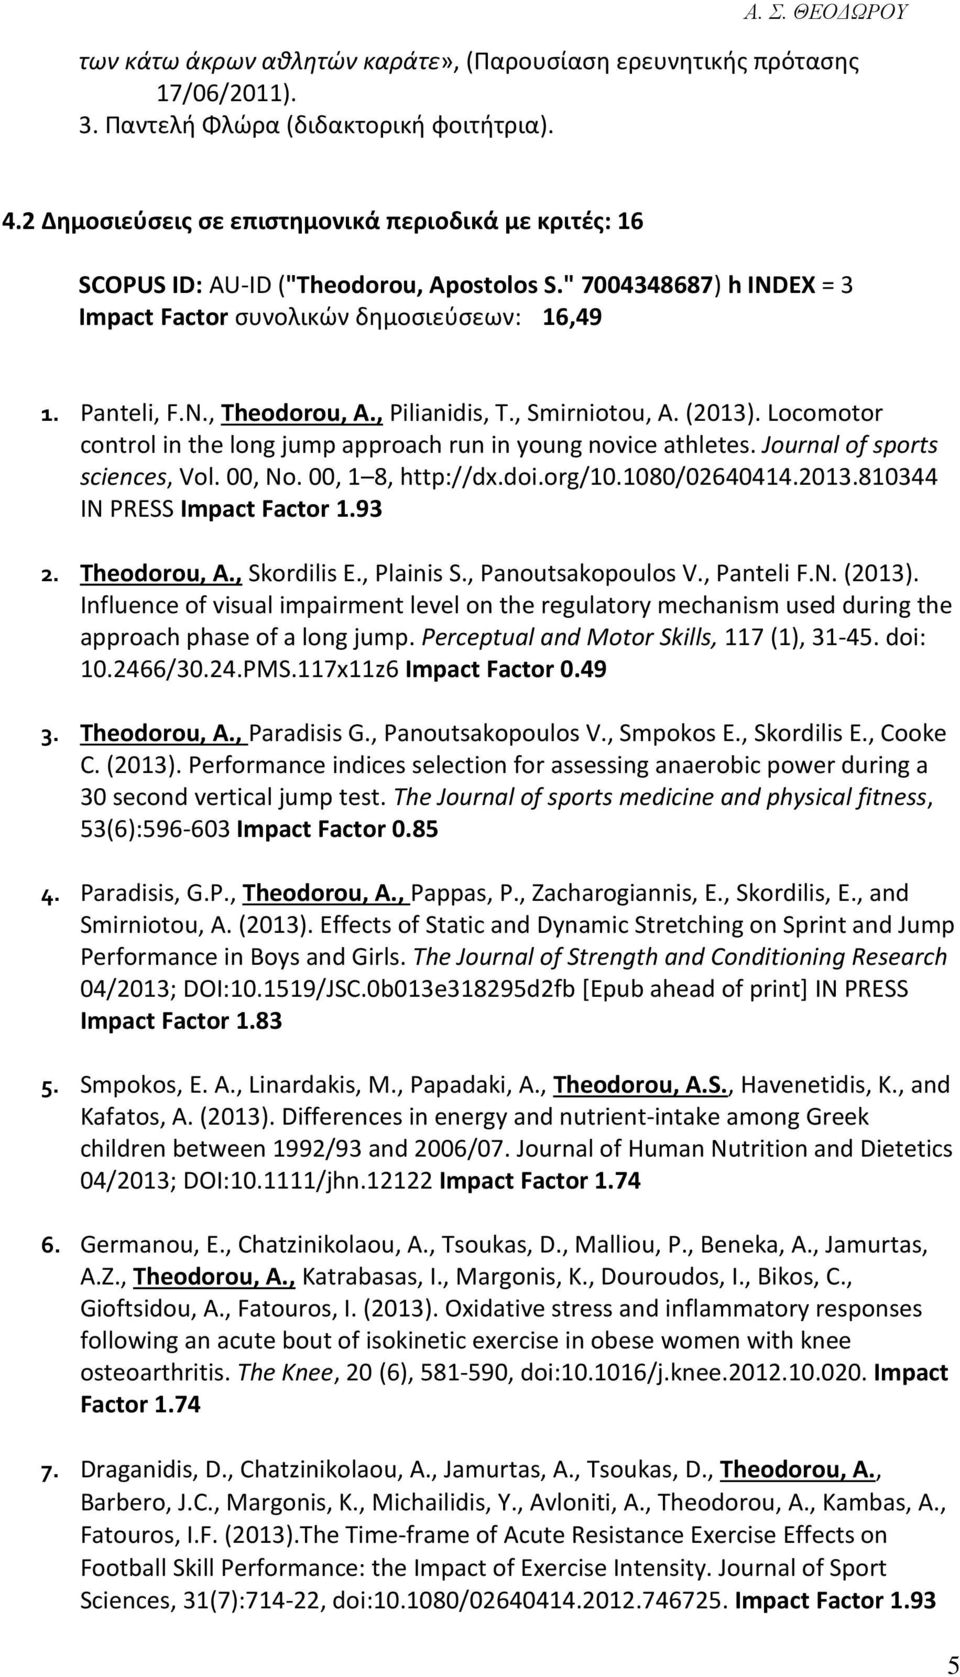 , Pilianidis, T., Smirniotou, A. (2013). Locomotor control in the long jump approach run in young novice athletes. Journal of sports sciences, Vol. 00, No. 00, 1 8, http://dx.doi.org/10.1080/02640414.